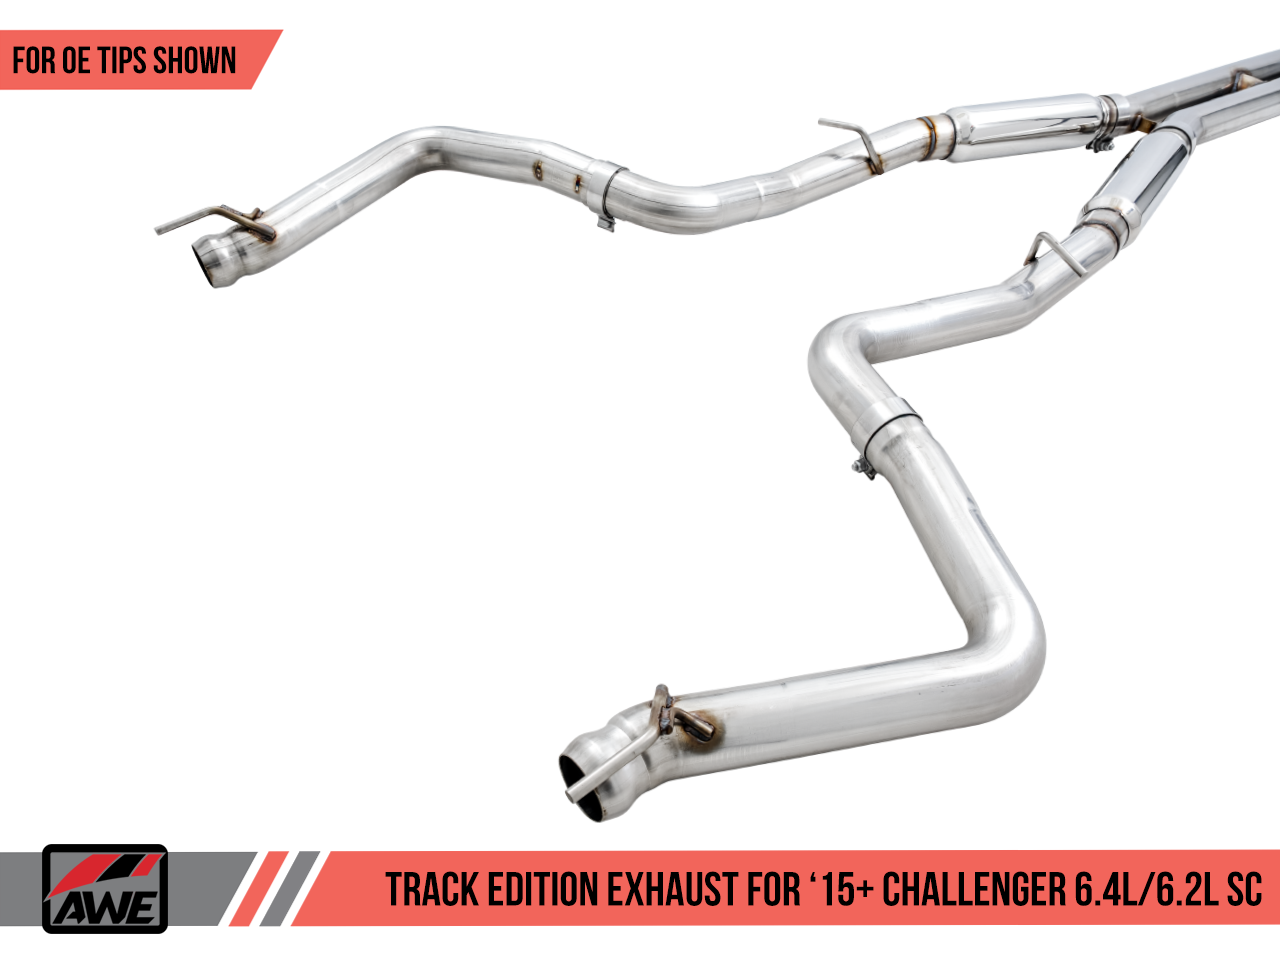 Track Edition Exhaust for 15+ Challenger 6.4 / 6.2 SC - Stock Tips